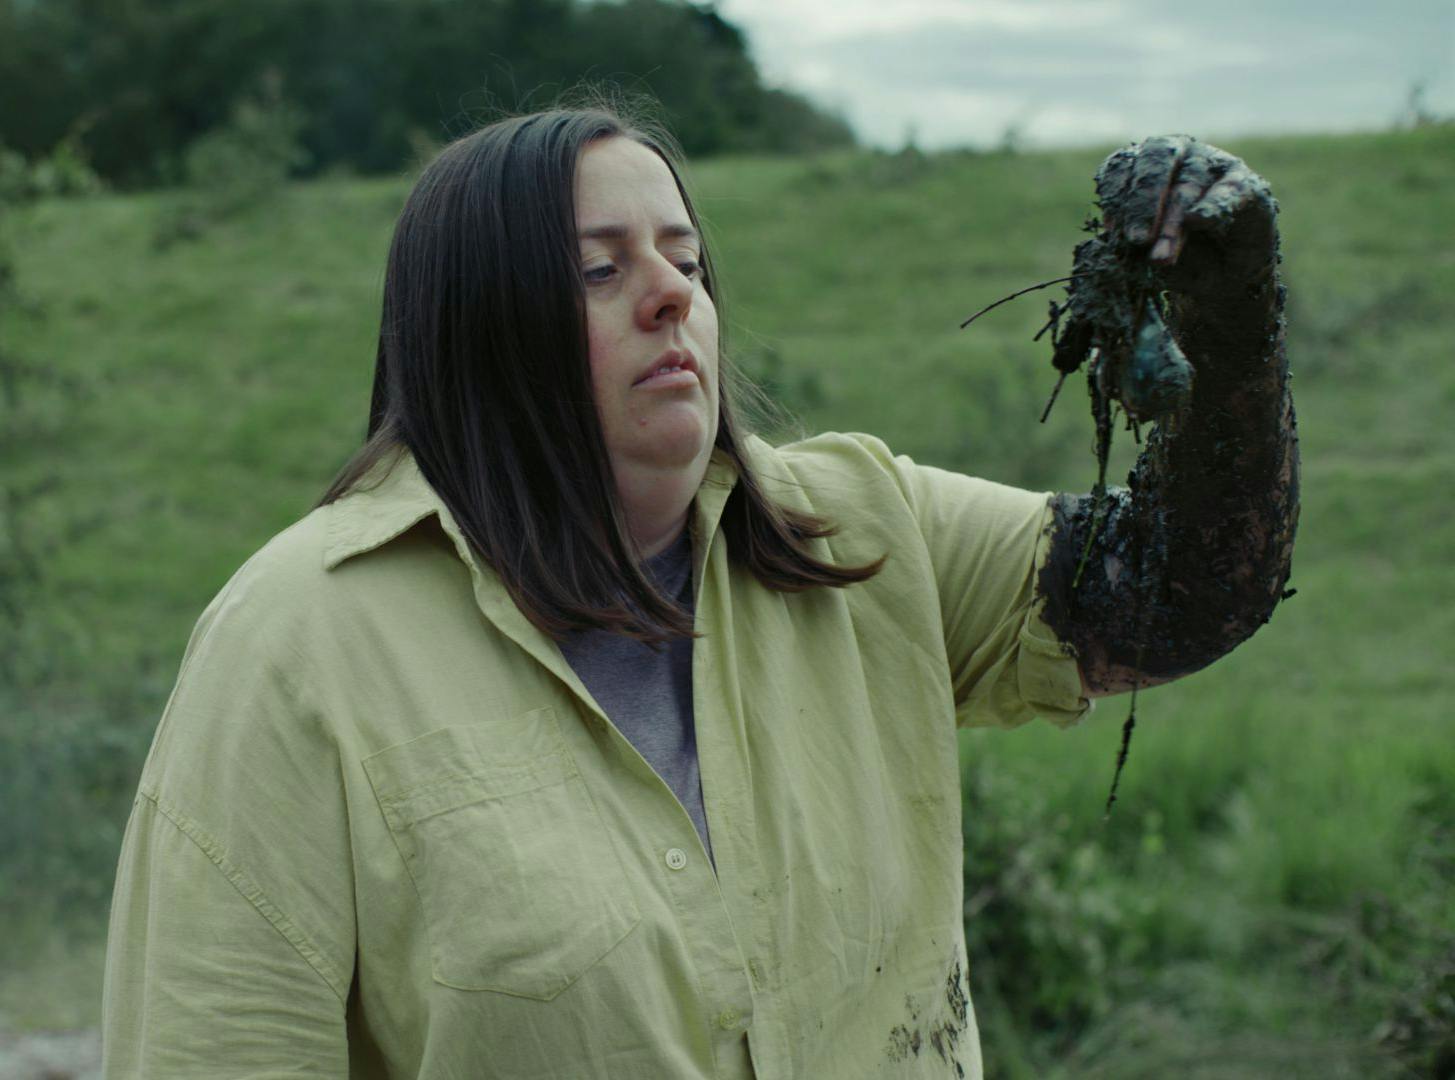 Dark comedy - photo of a lady holding muddy vegetables